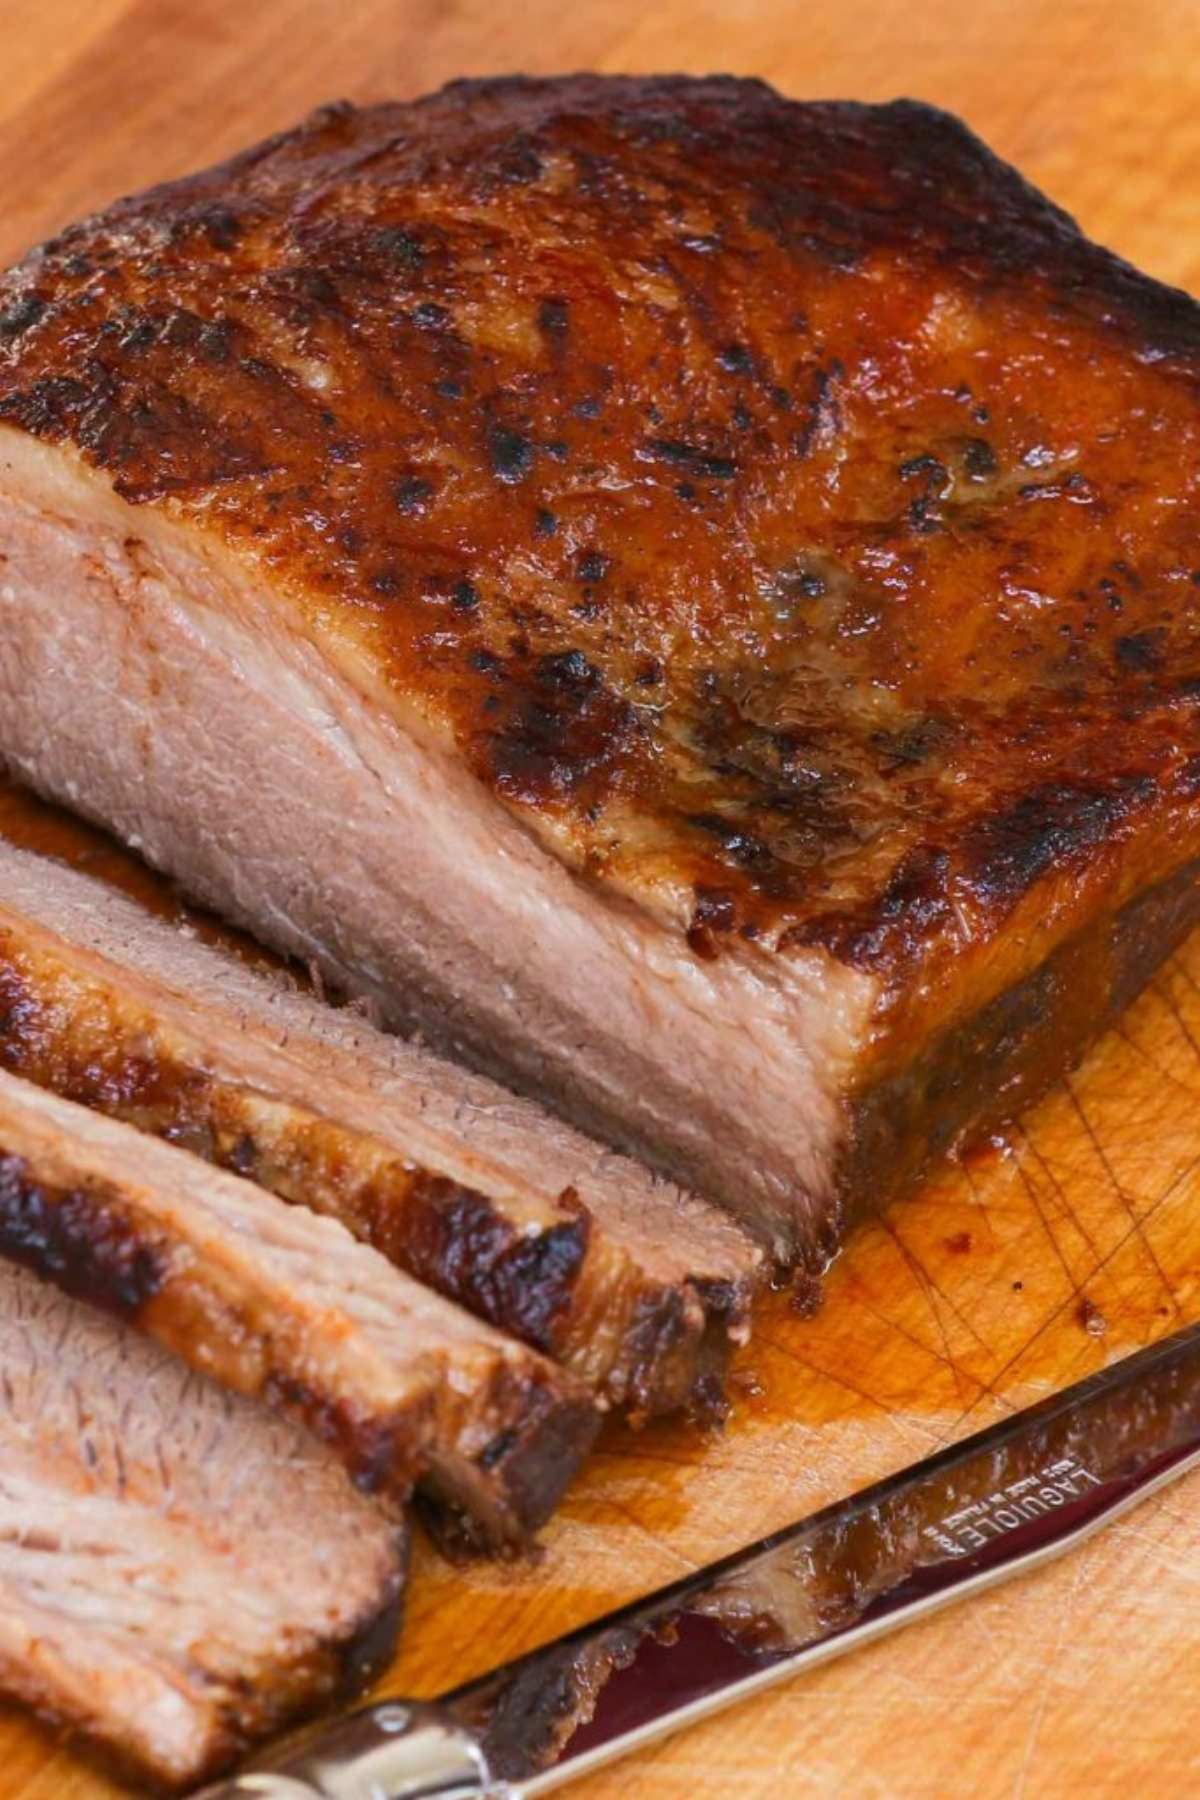 It’s sometimes inevitable that you will end up with leftover brisket, no matter how good it is! Since you put so much hard work into making it, you want to use it to its fullest. If you’re searching for ideas of how to use your leftover brisket, you’ve certainly come to the right place! We’ve collected 15 of the Best Leftover Brisket Recipes that will transfer the leftovers to a new delicious meal!